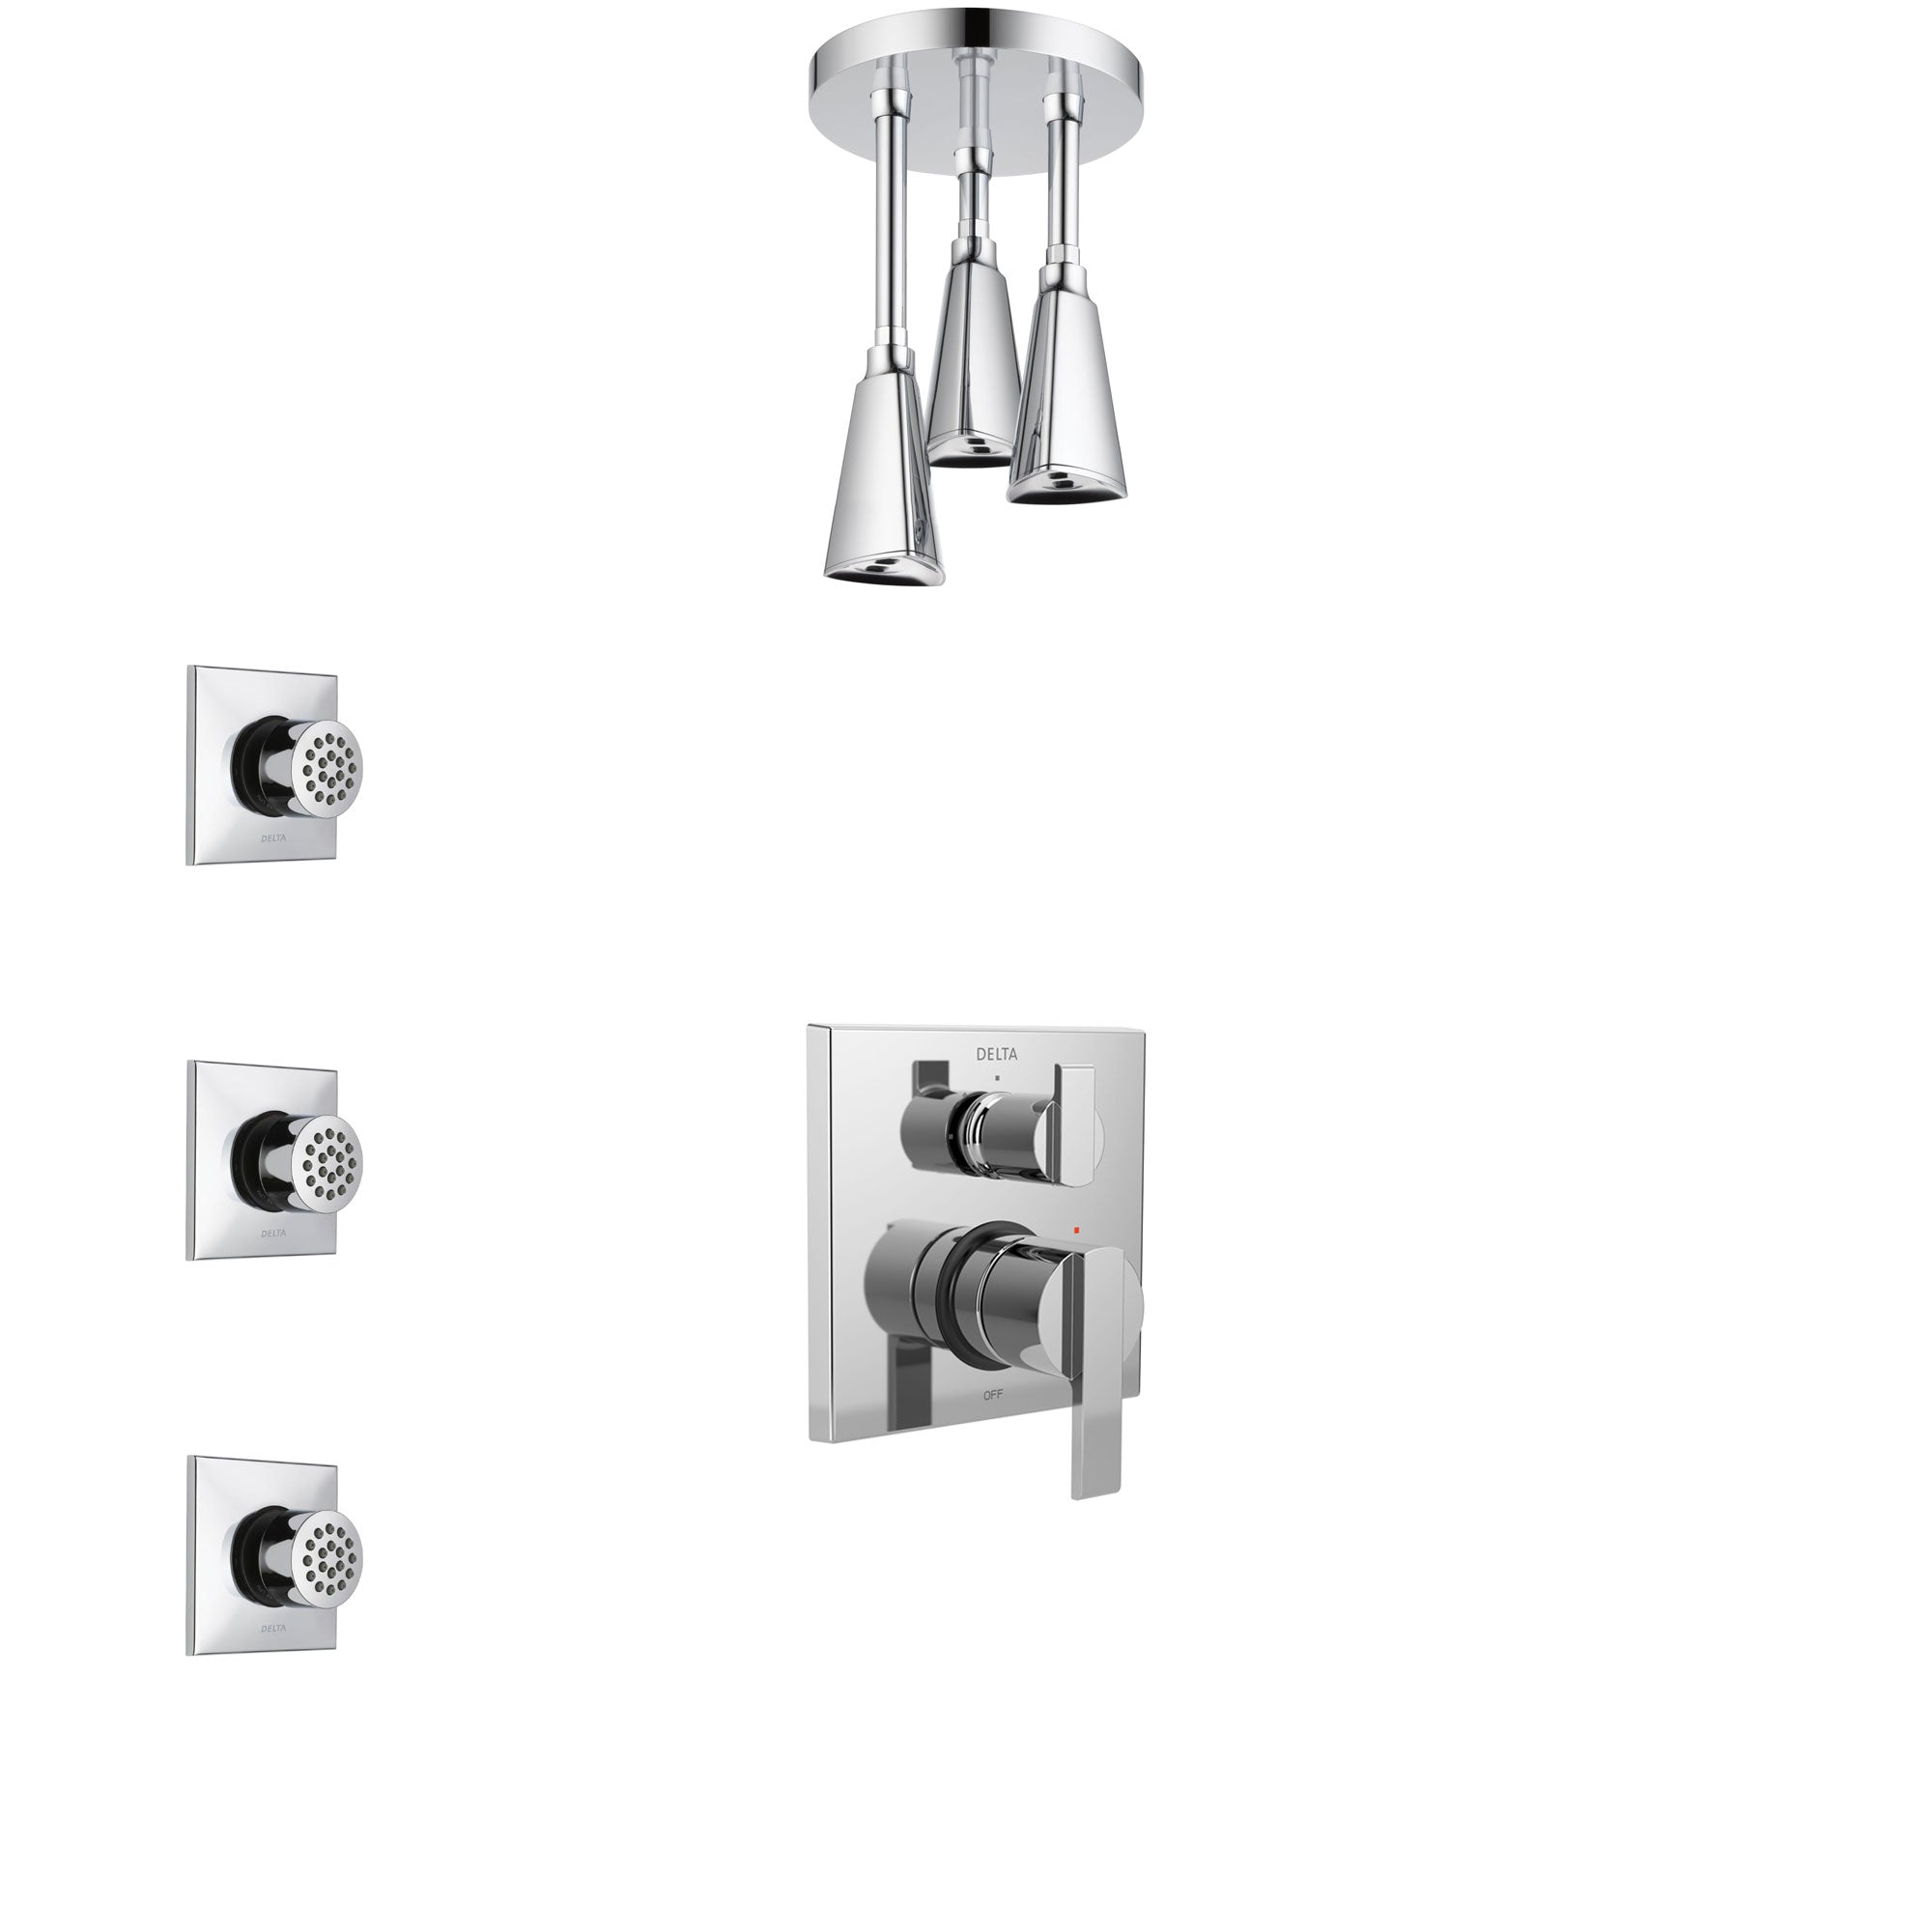 Delta Ara Chrome Finish Shower System with Control Handle, Integrated 3-Setting Diverter, Ceiling Mount Showerhead, and 3 Body Sprays SS248674